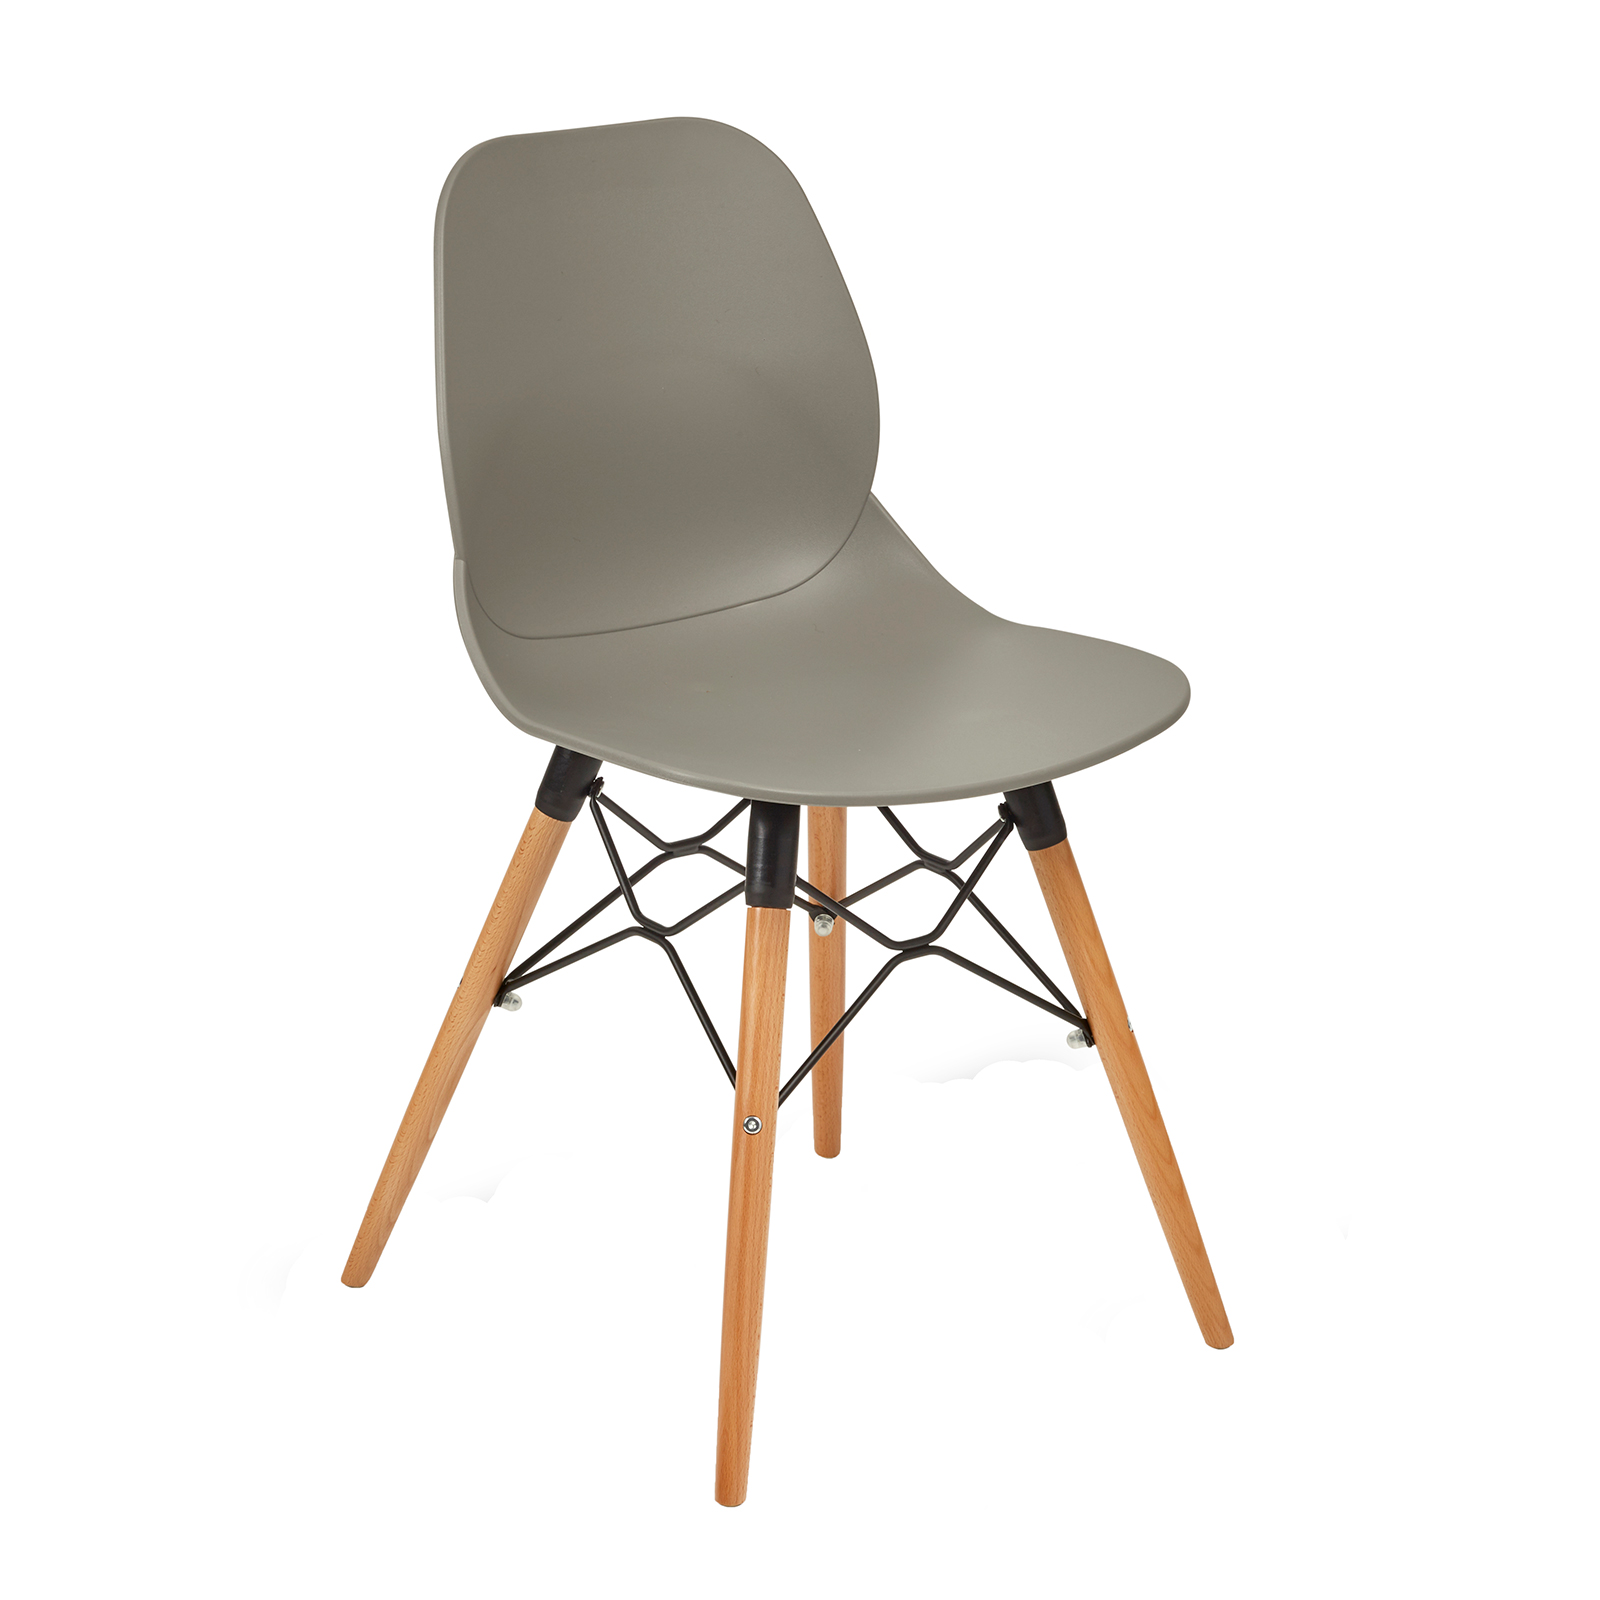 Strut multi-purpose chair with natural oak 4 leg frame and black steel detail - grey